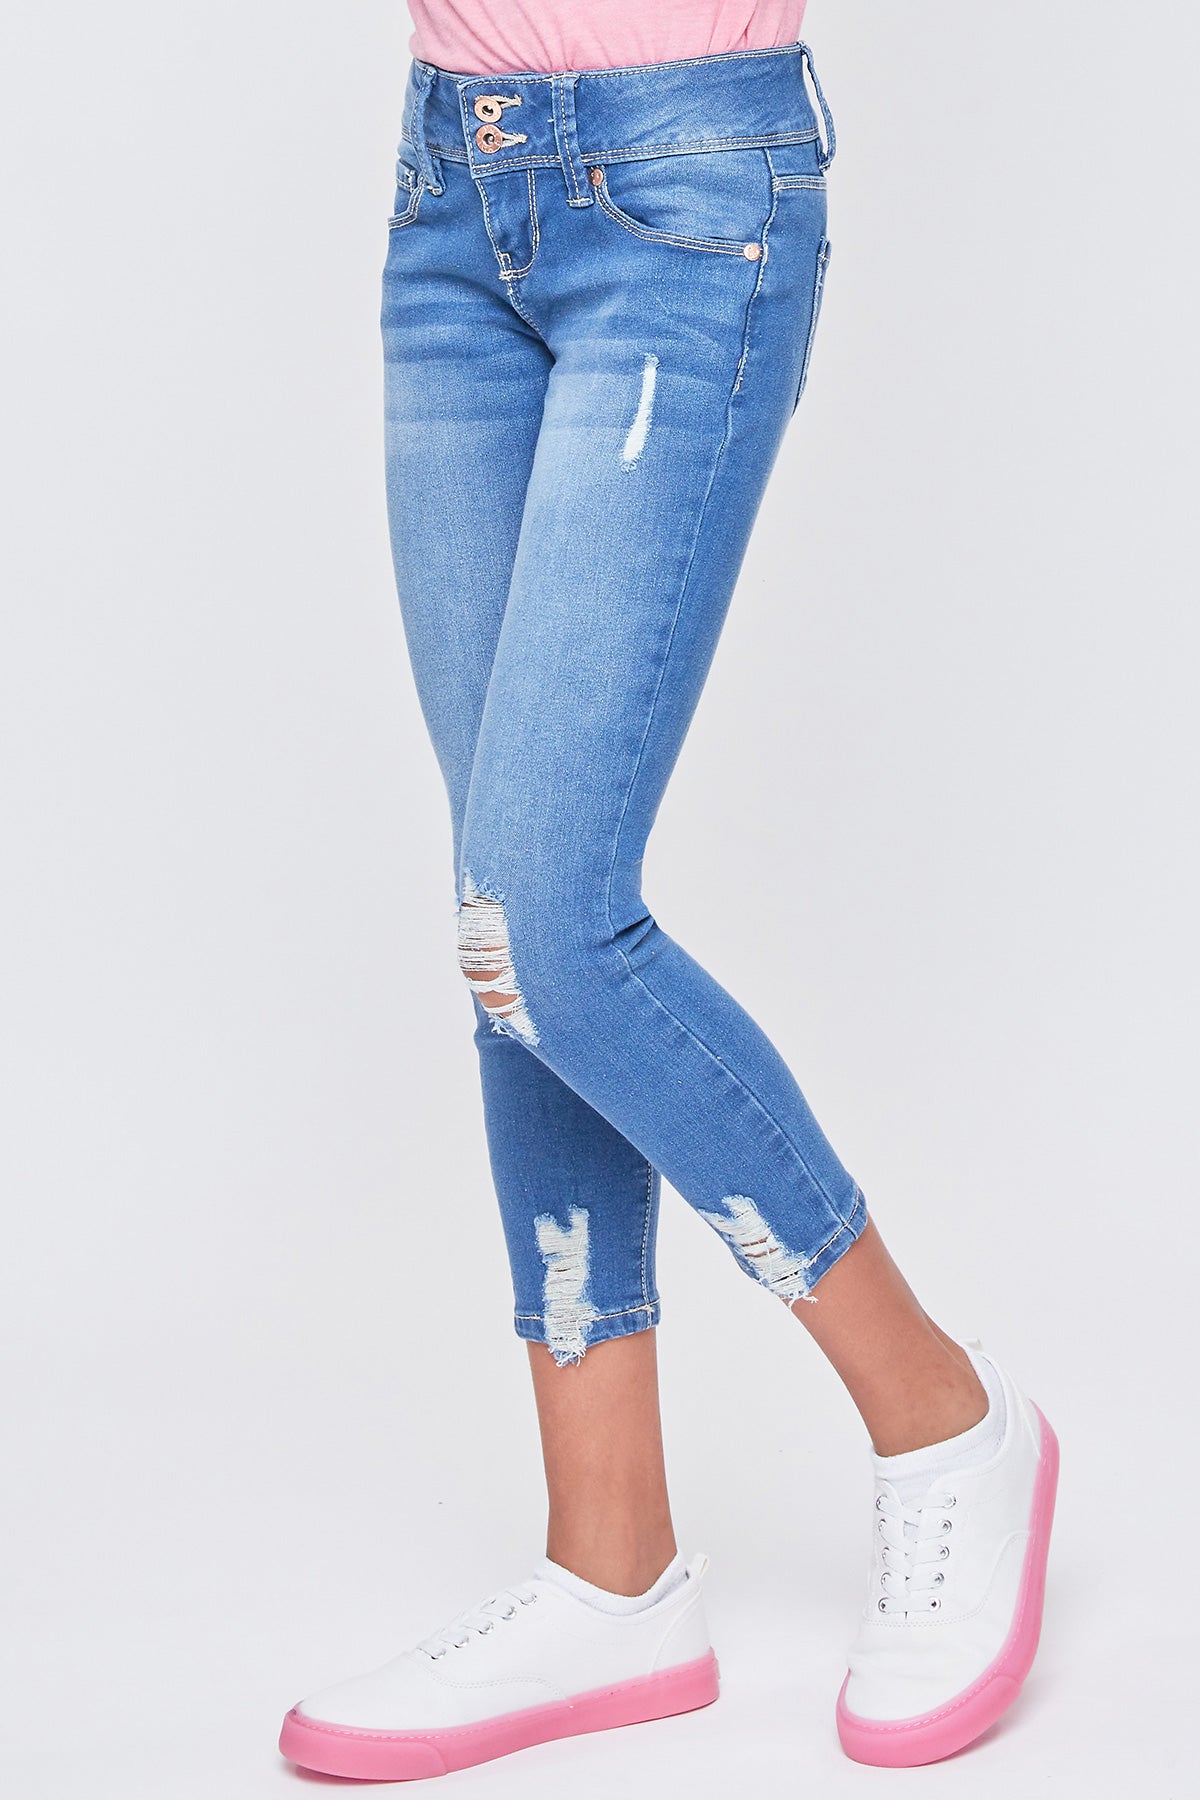 Missy Mid-Rise Skinny Jean 12 Pack from Royalty for Me